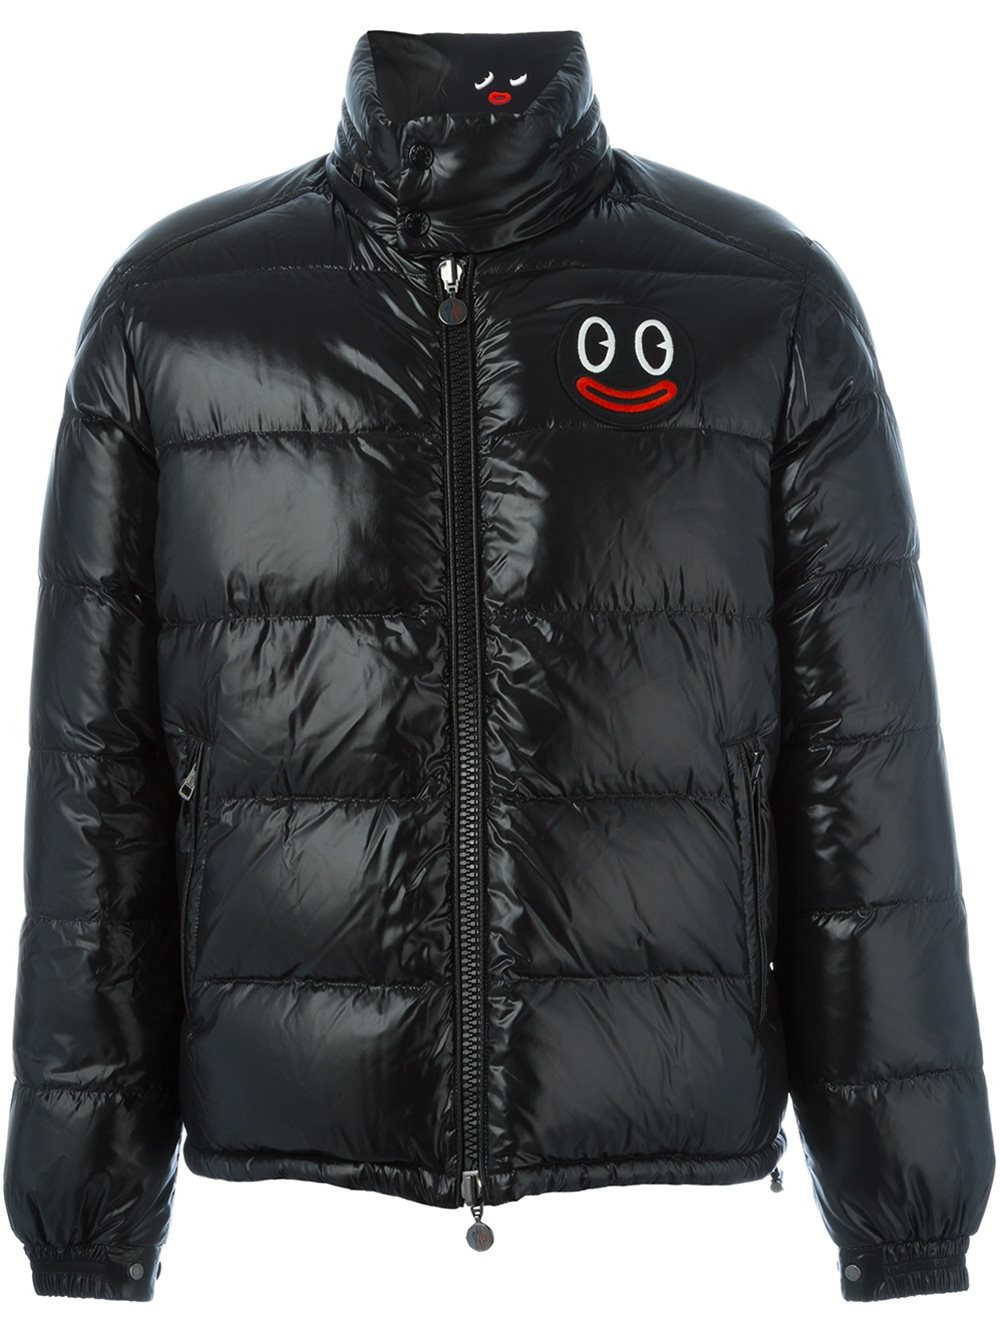 Lyst - Moncler 'russel' Jacket By ' X Rolling Stones' in Black for Men